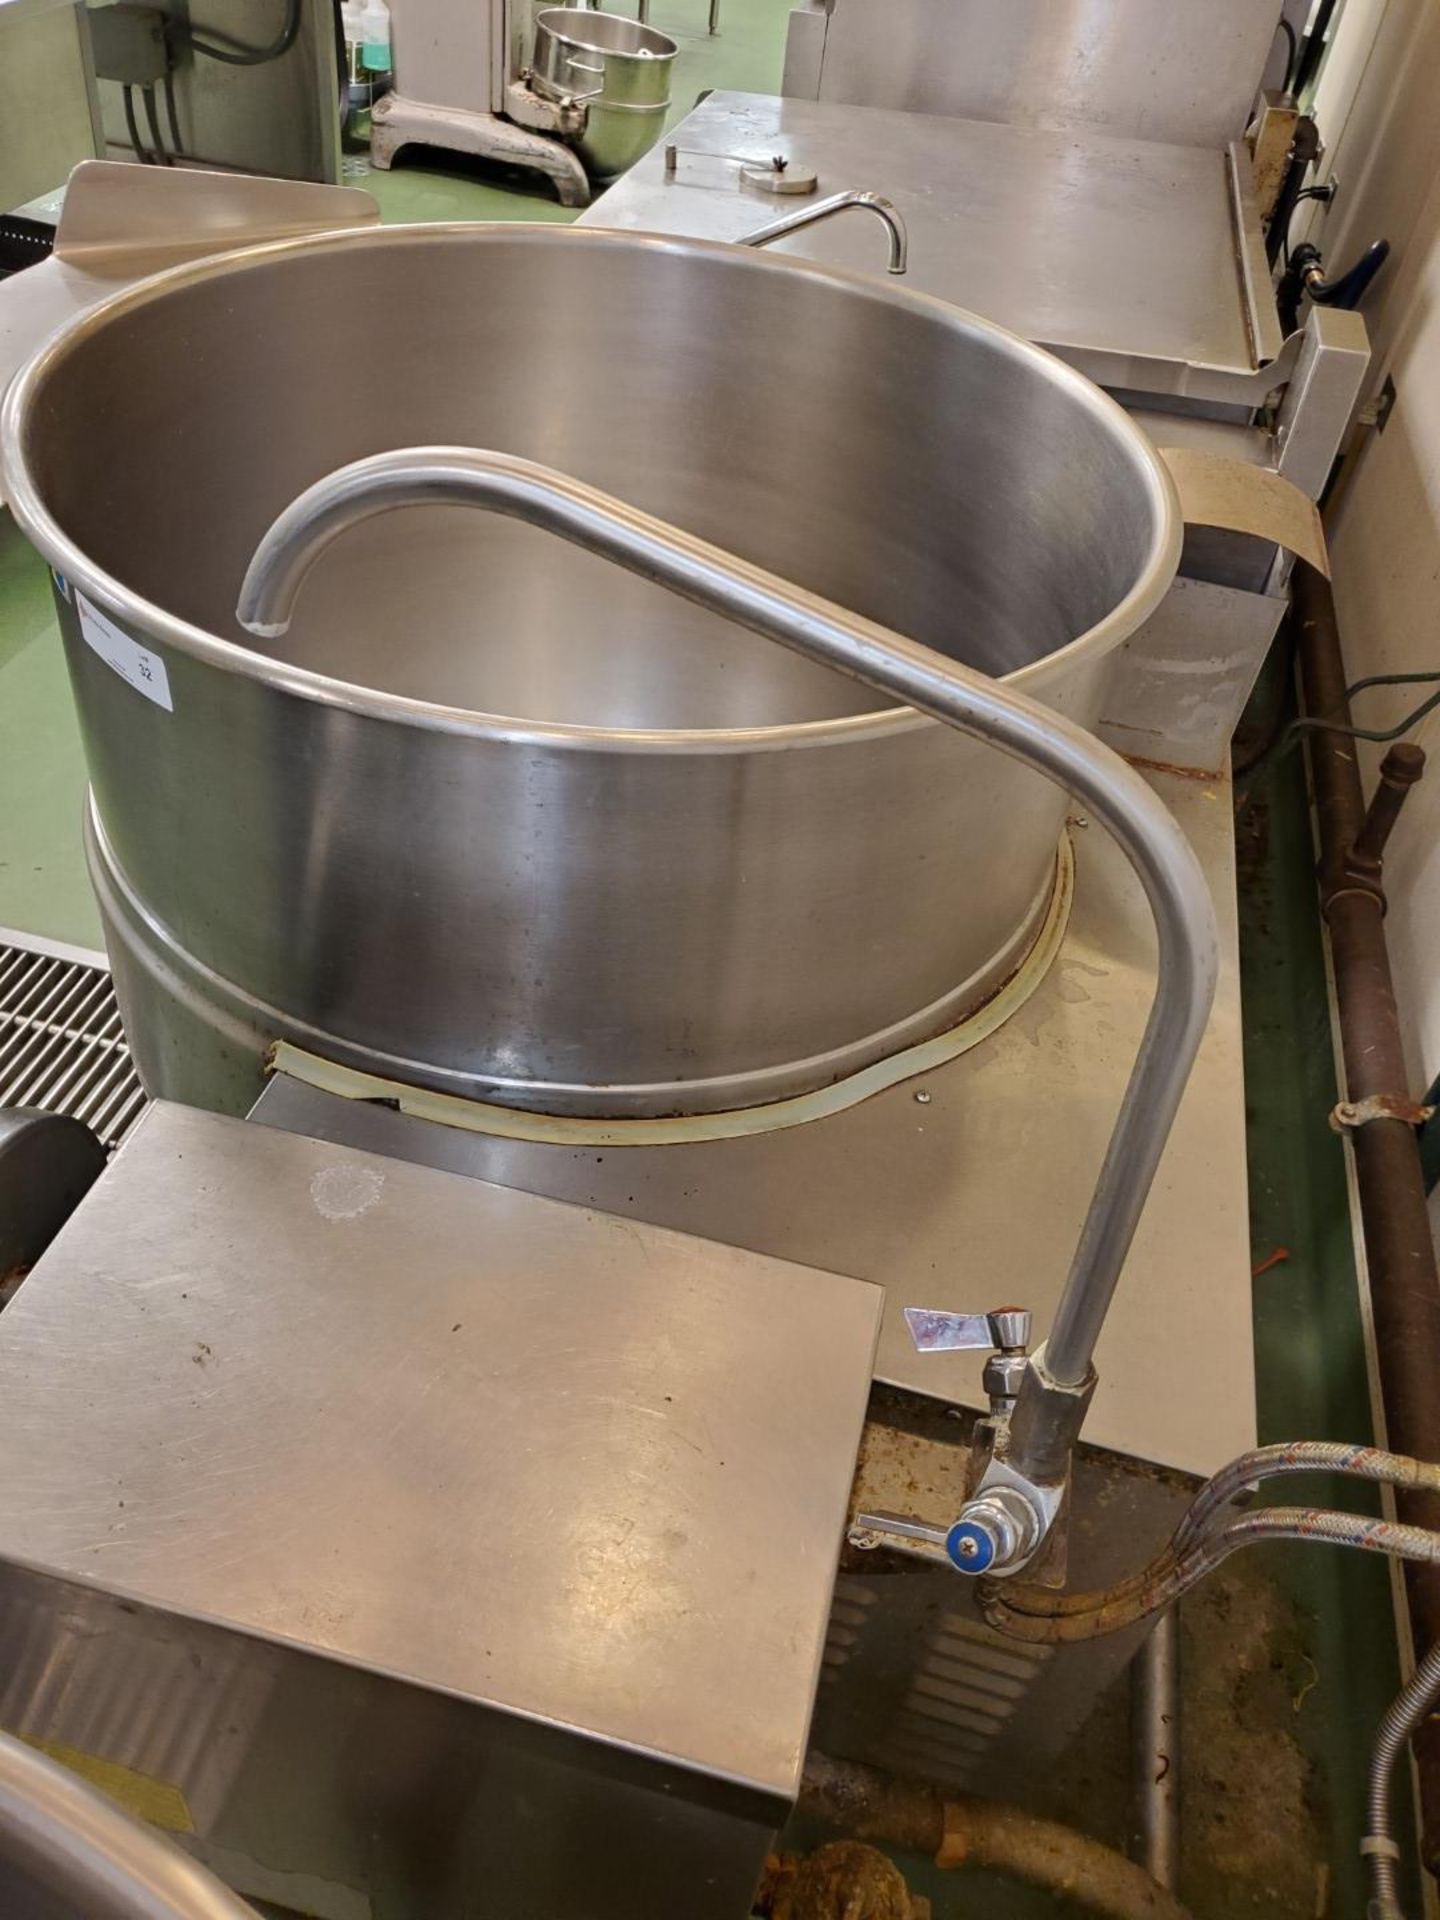 60 Gallon Cleveland Soup Kettle, stainless steel construction, model KGL-60-T - Image 5 of 6